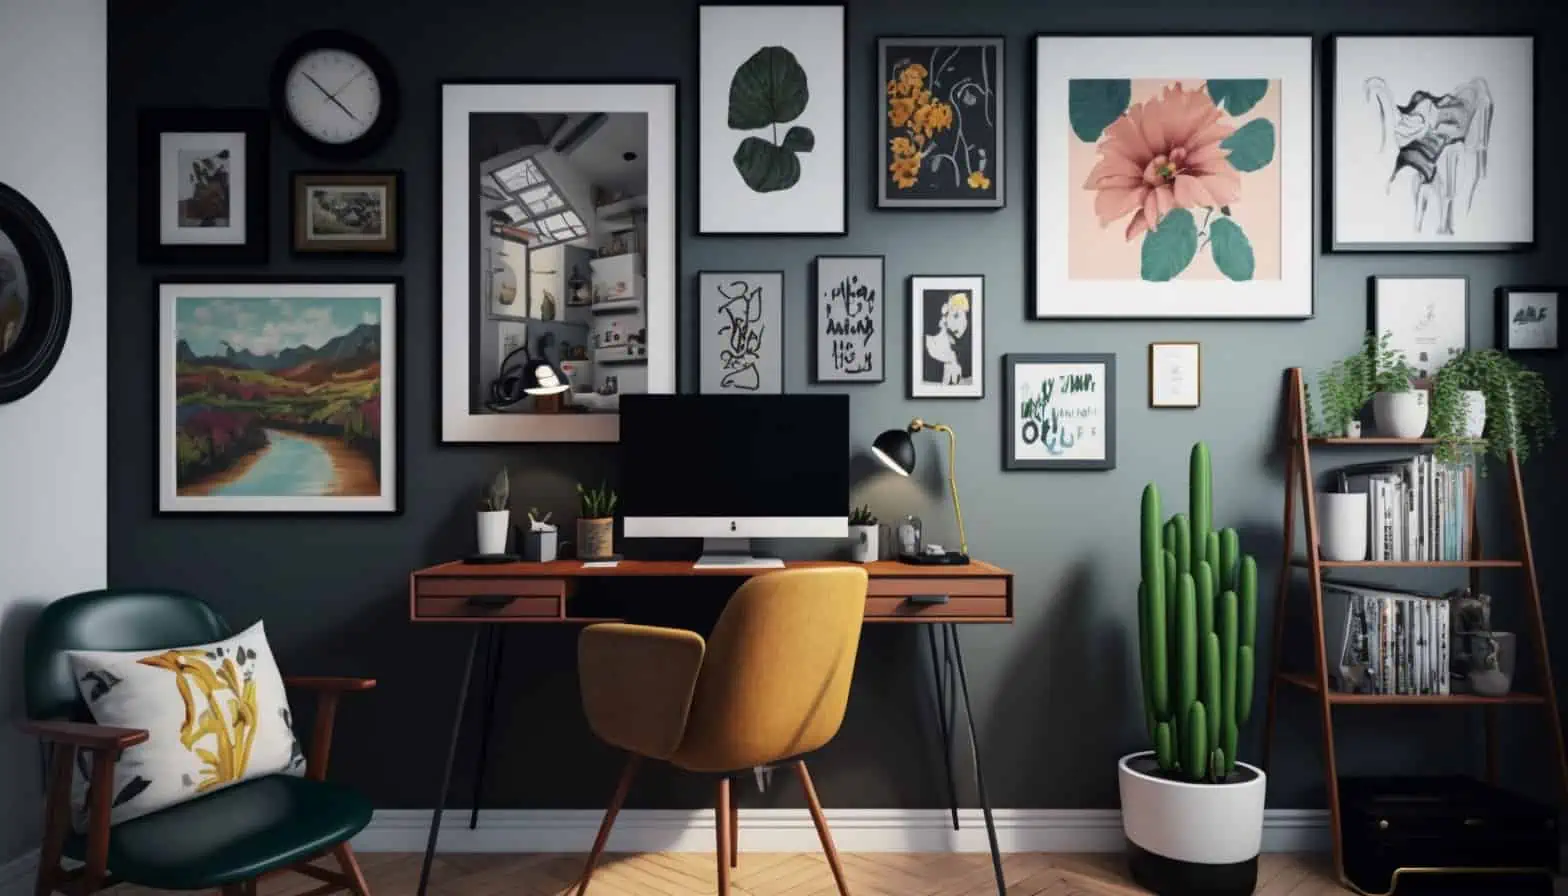 77 Home Office Ideas to Help You Work Better and Smarter